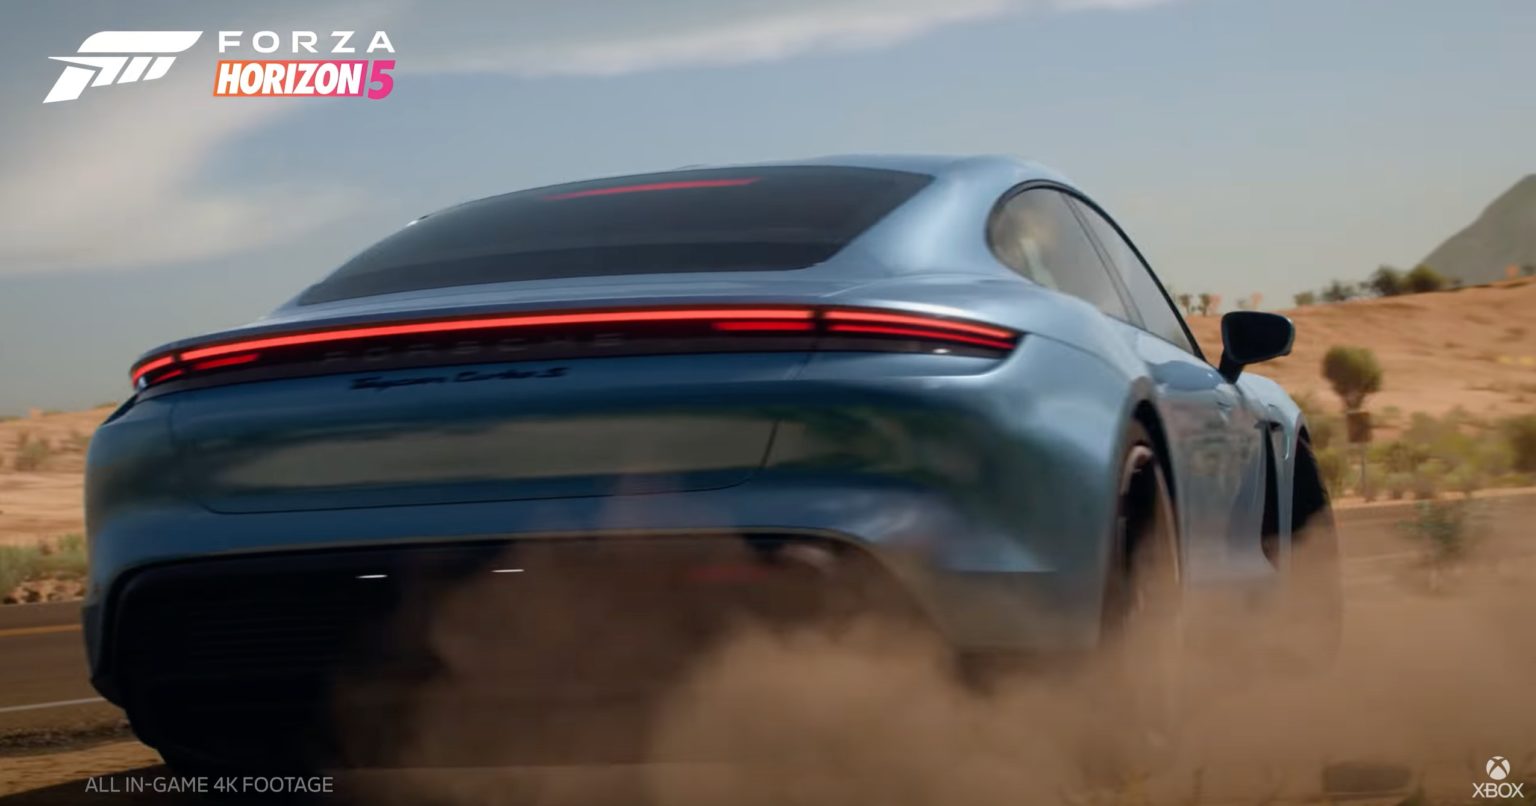 All of the Porsches in the Forza Horizon 5 official announcement